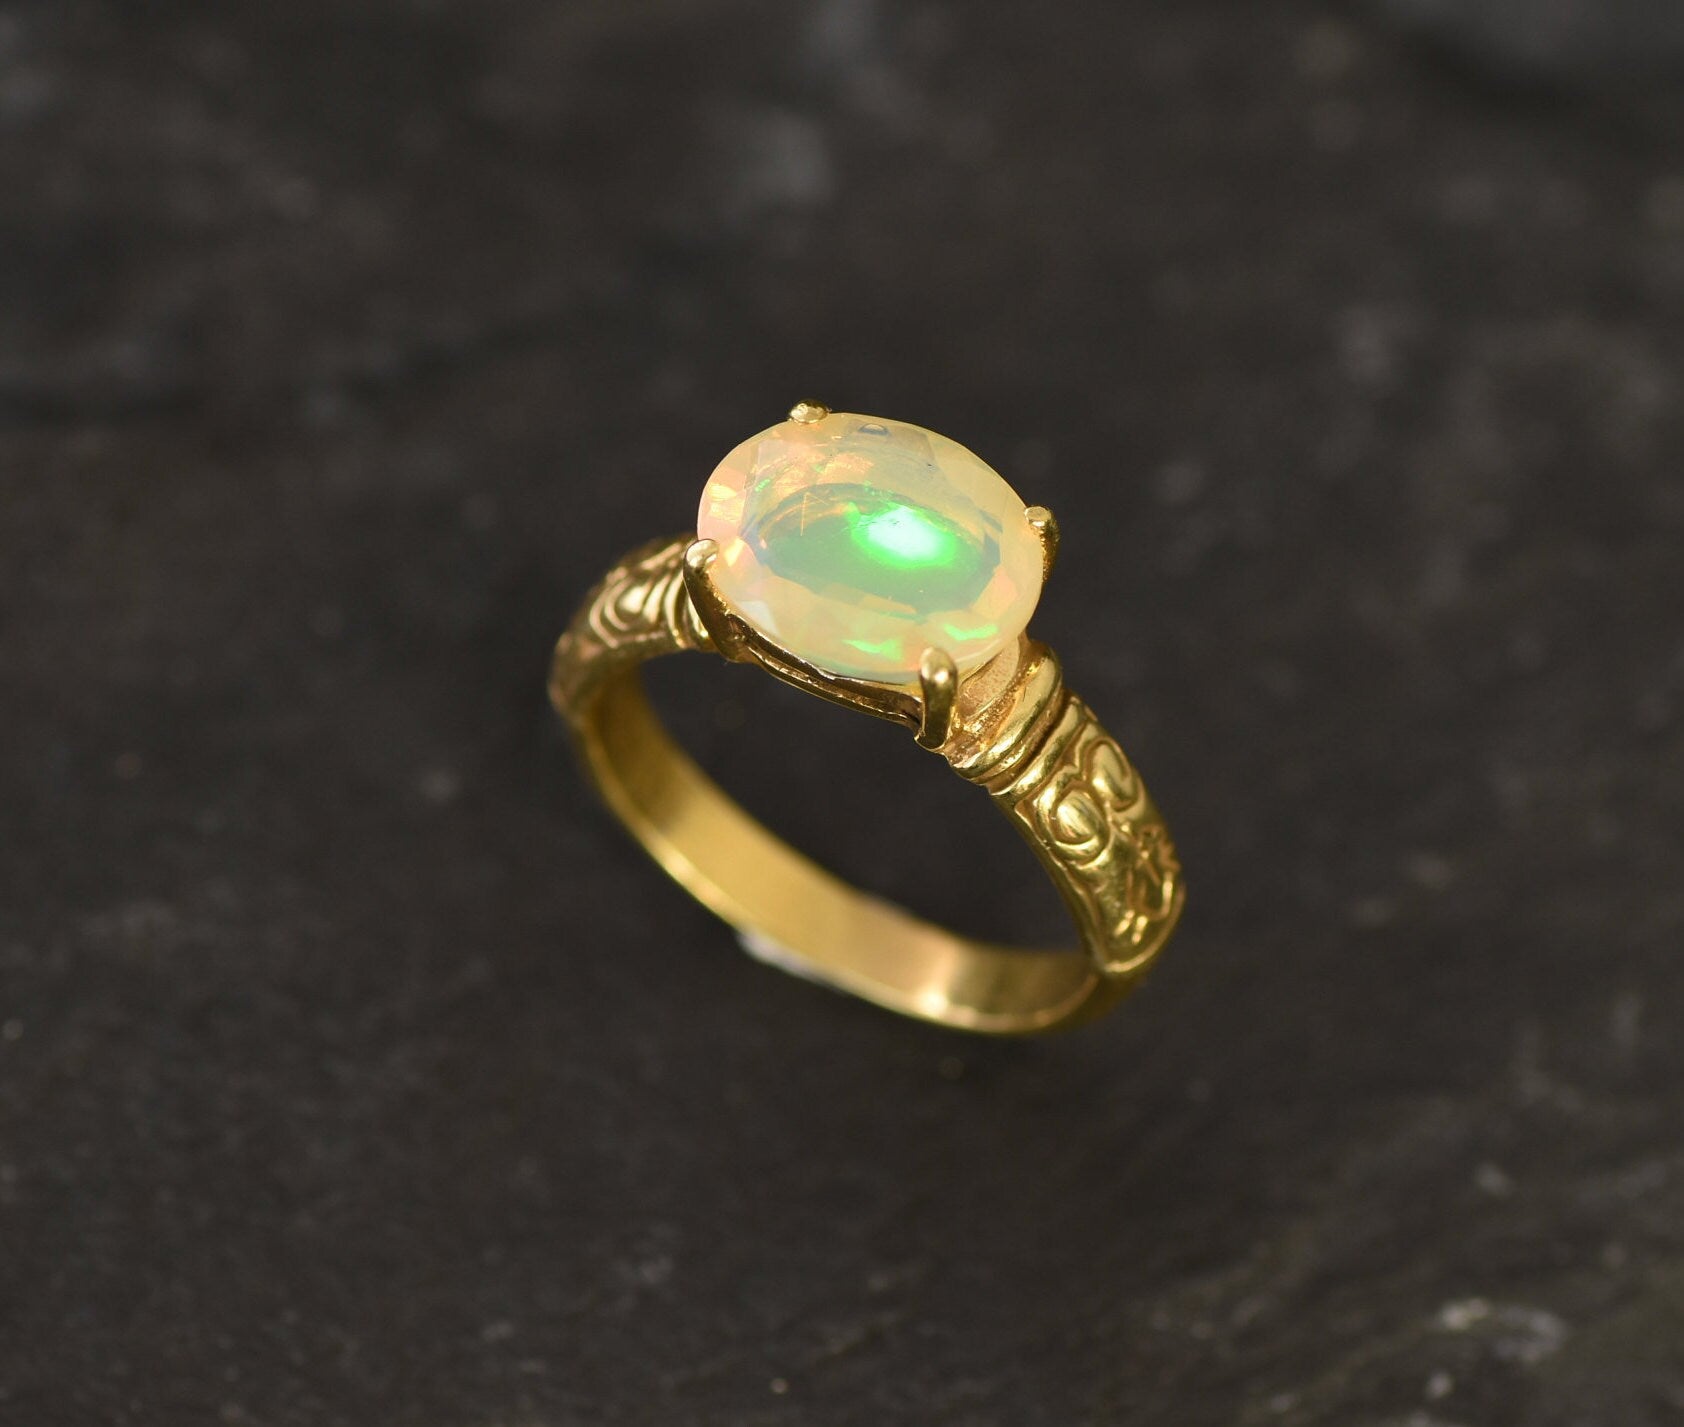 Gold Opal Ring, Ethiopian Opal Ring, Tribal Ring, Gold Statement Ring, October Birthstone, Fire Opal Ring, Vintage Opal Ring, Solid Silver